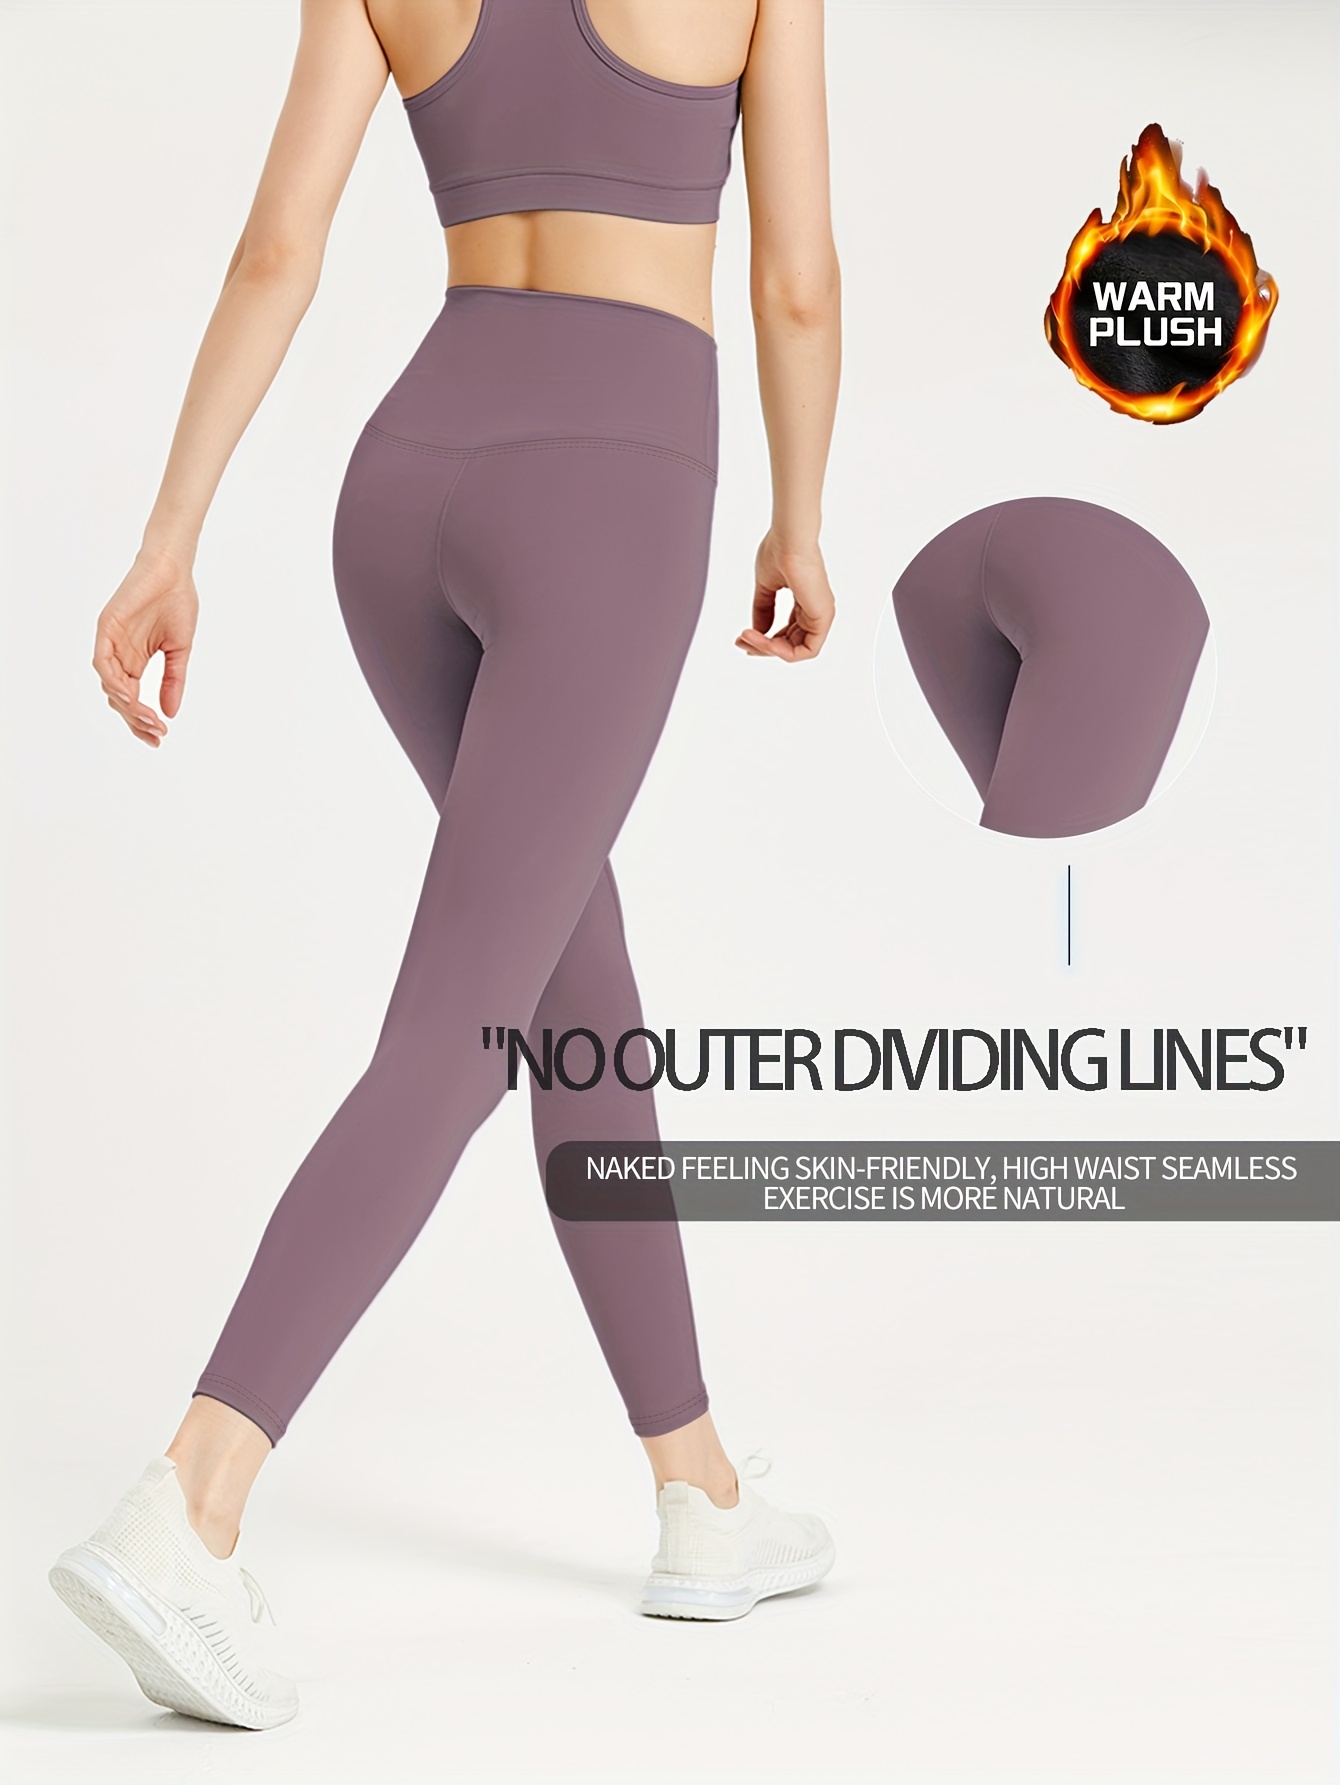 UNIQLO AIRism Seamless High-Rise Support Leggings